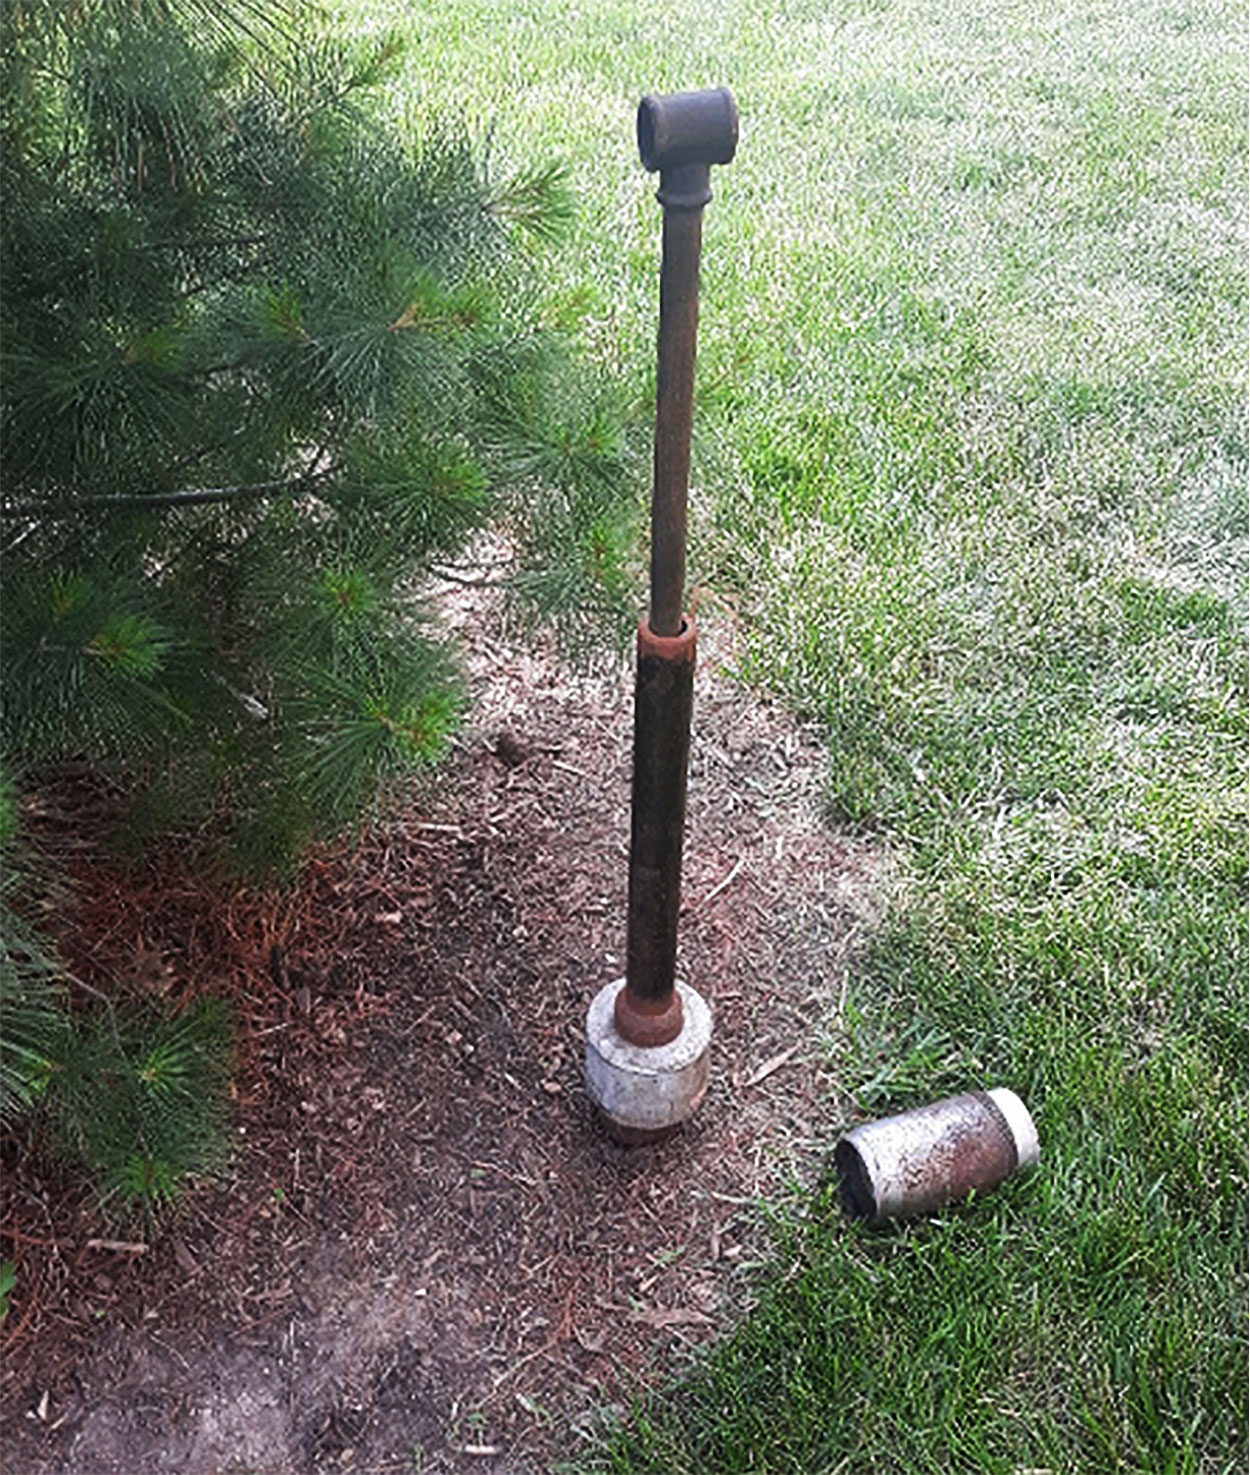 A soil coring device that has been pounded into ground